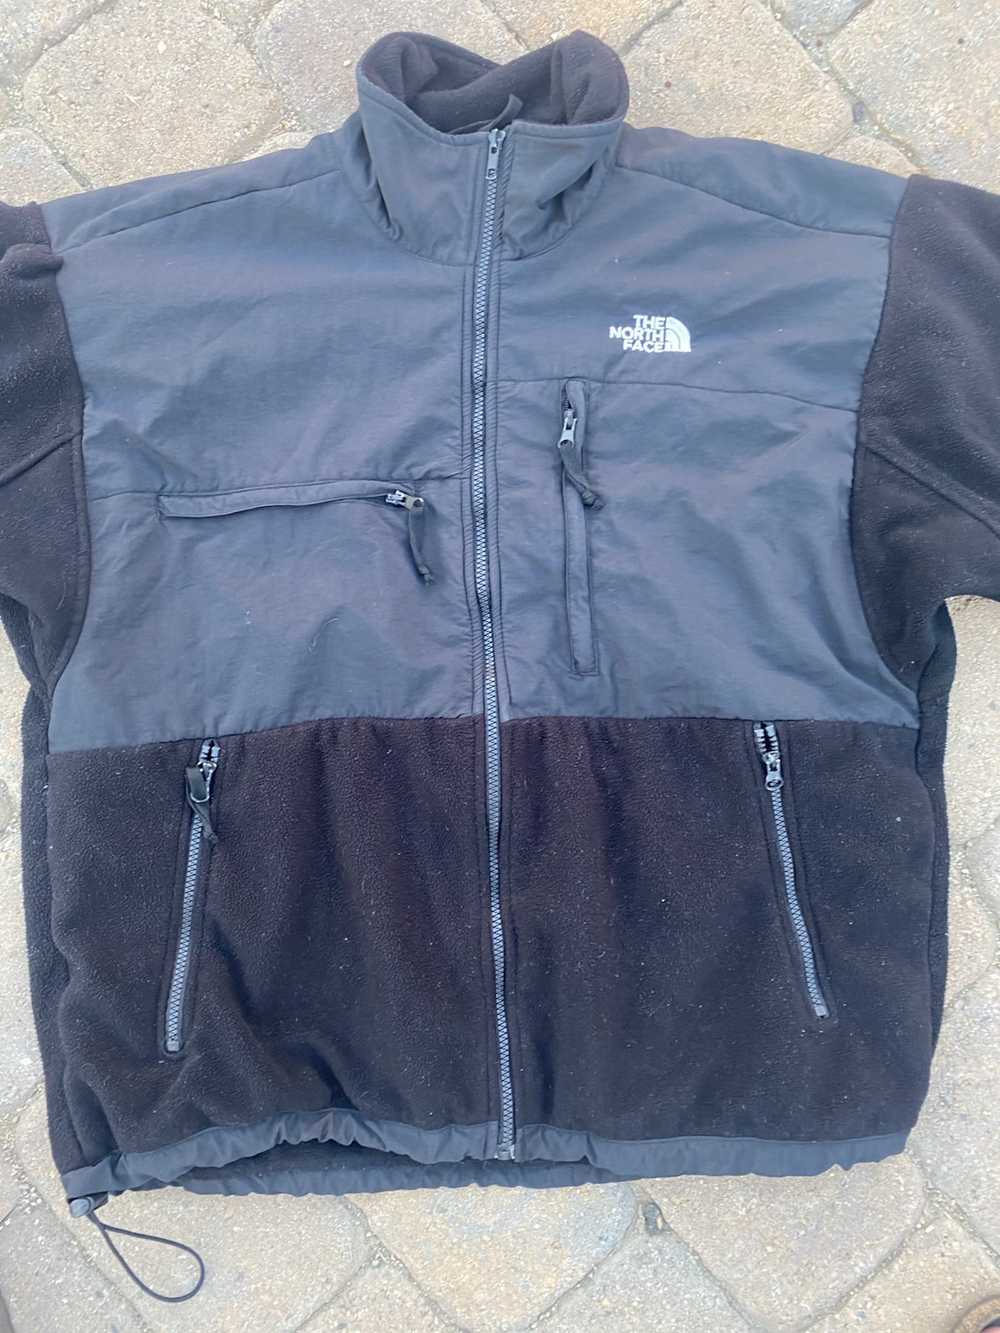 The North Face North face jacket - image 2